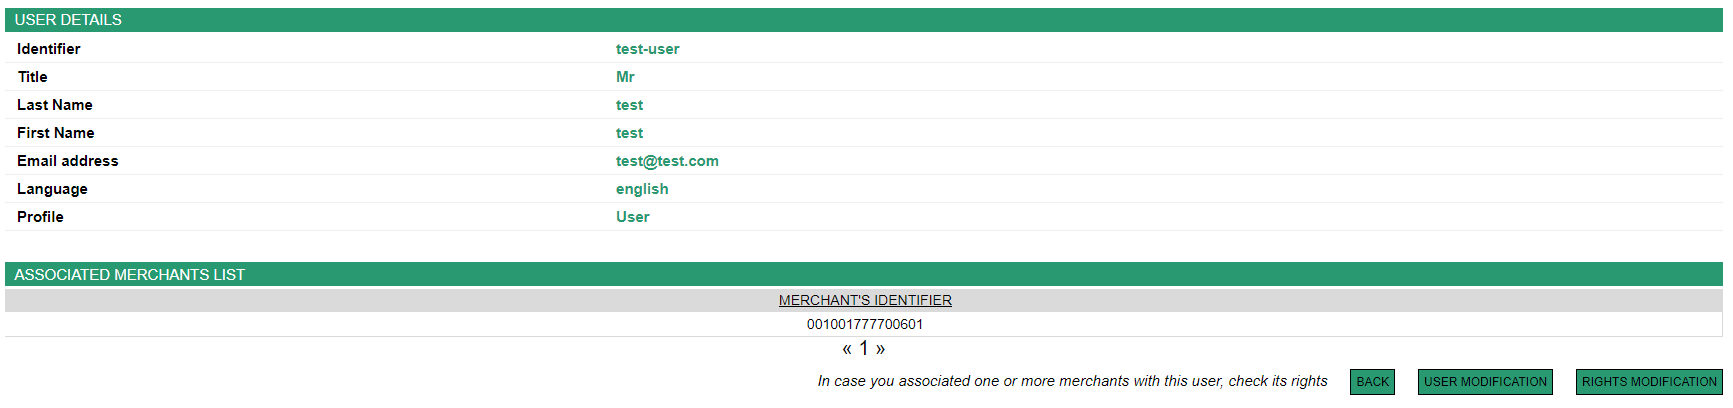 user's characteristics page: login, name, email address, etc.